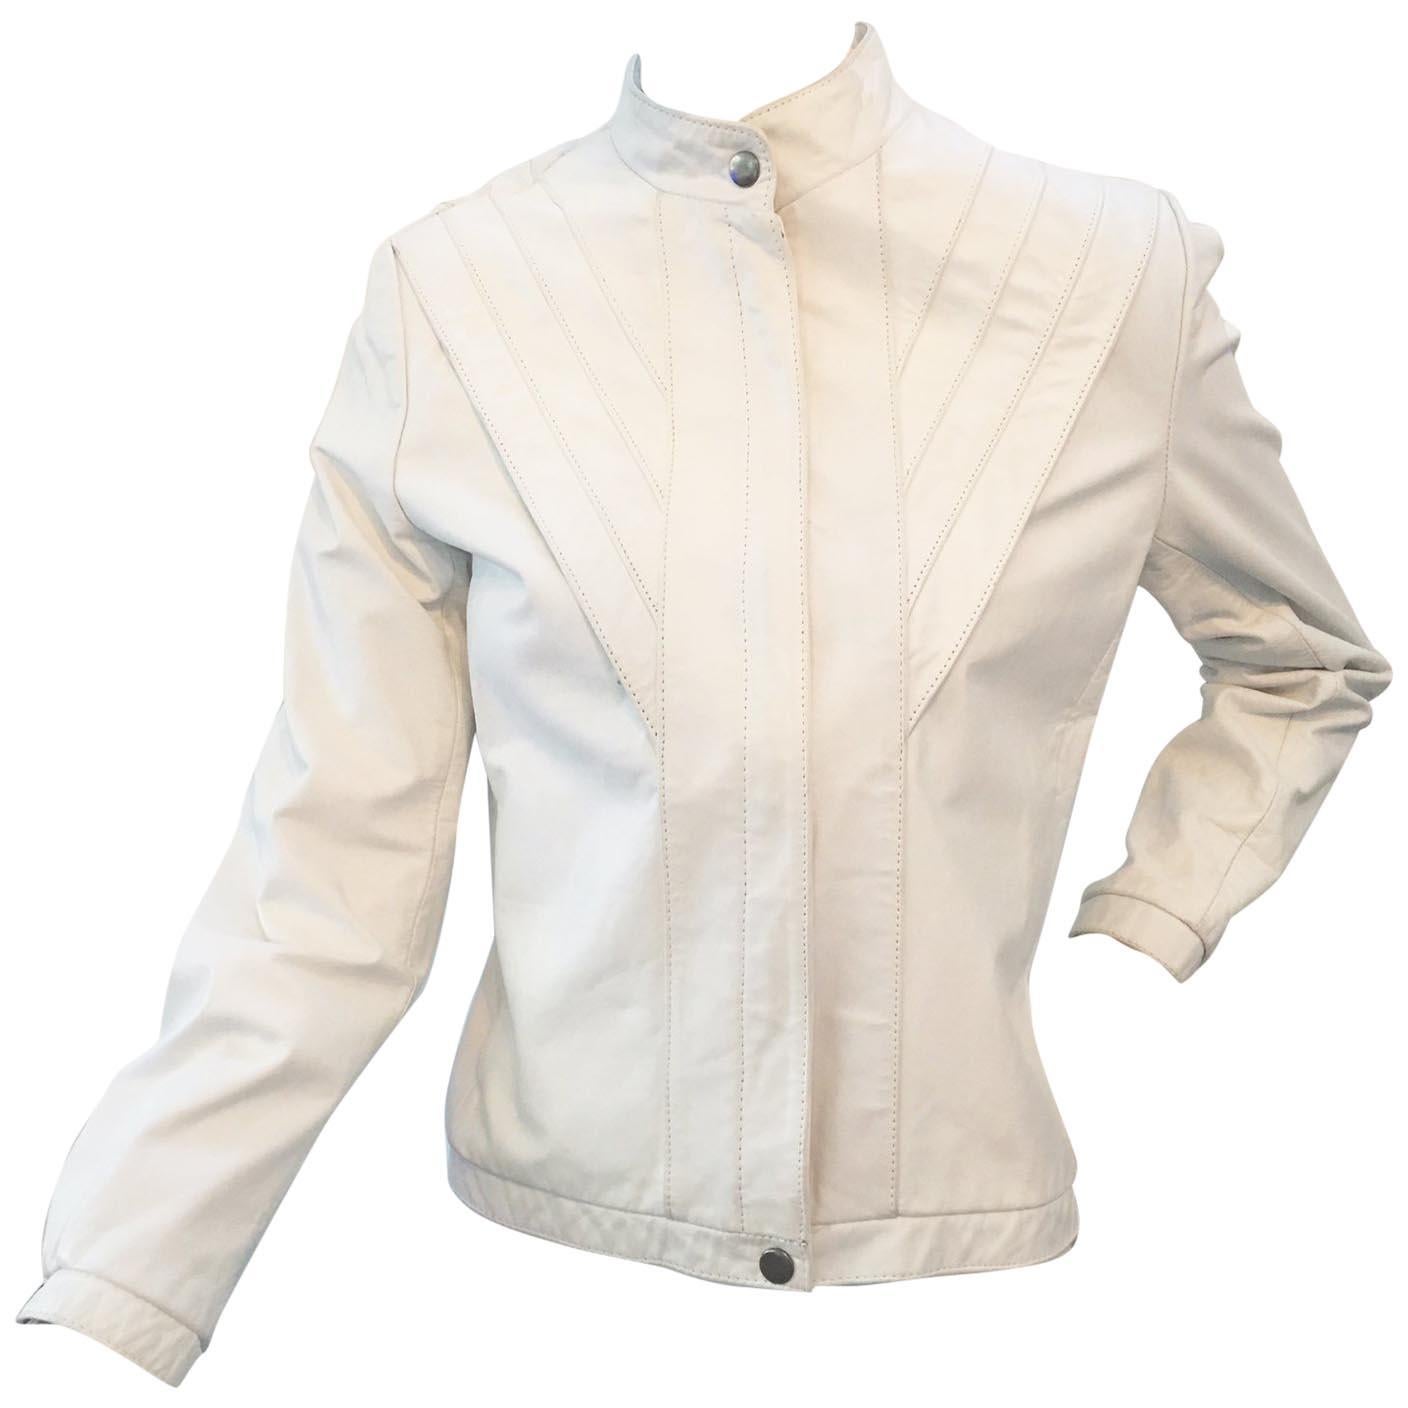 Vintage 1980s White Leather Jacket by Casablanca